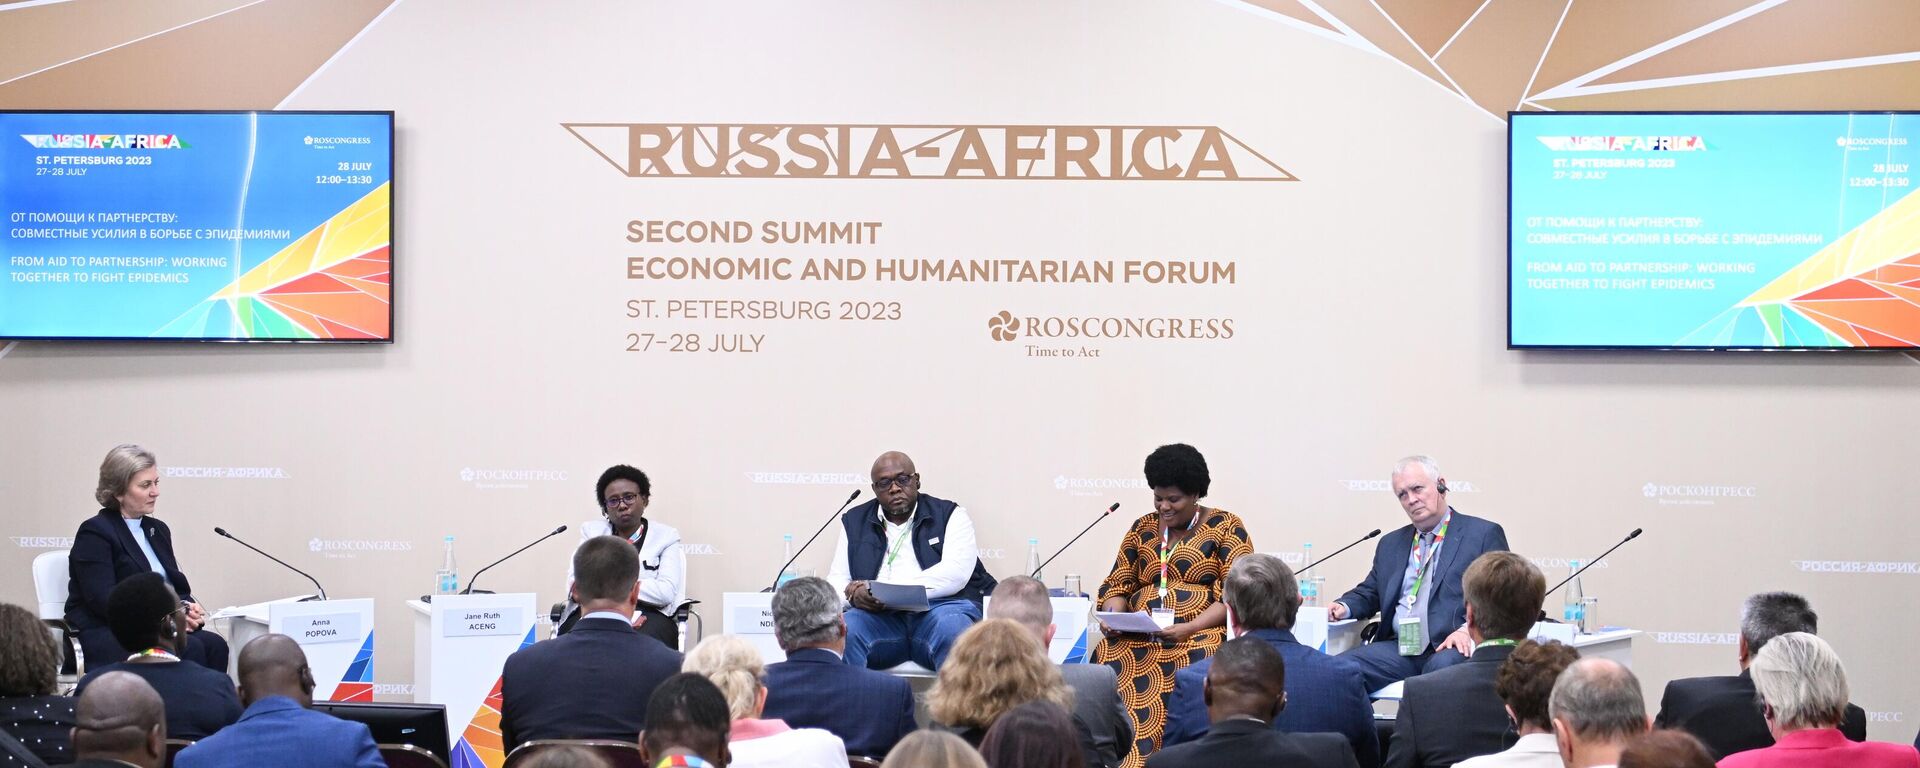 Participants of the session From aid to partnership: working together to fight epidemics at the Second Russia-Africa Summit in St. Petersburg.  - Sputnik Africa, 1920, 13.10.2023